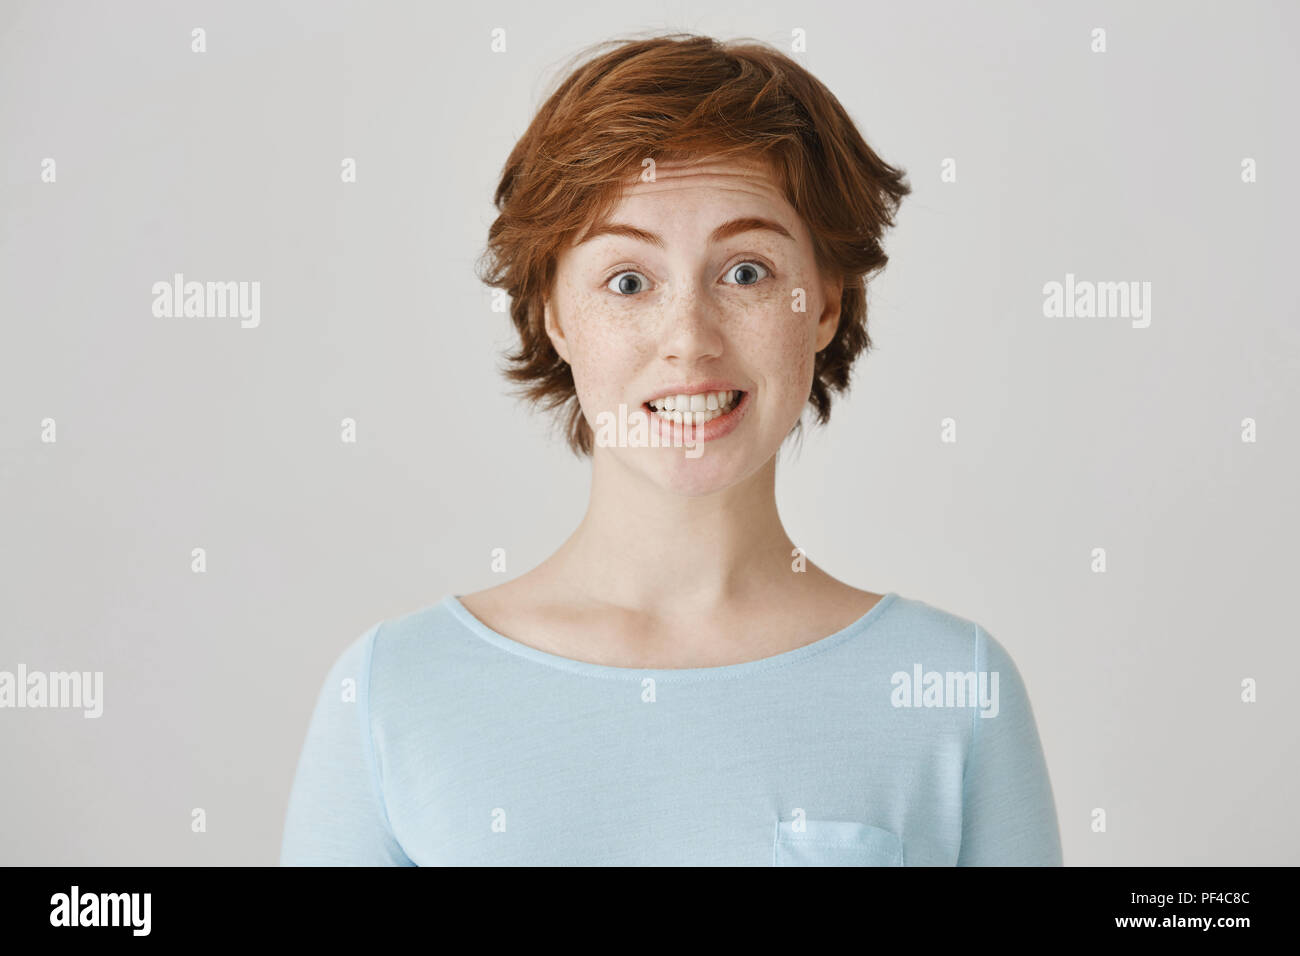 Studio portrait of attractive caucasian female with red hair and freckles feeling awkward, lifting eyebrows and smiling nervously, having no clue what to say in strange situation on meeting Stock Photo